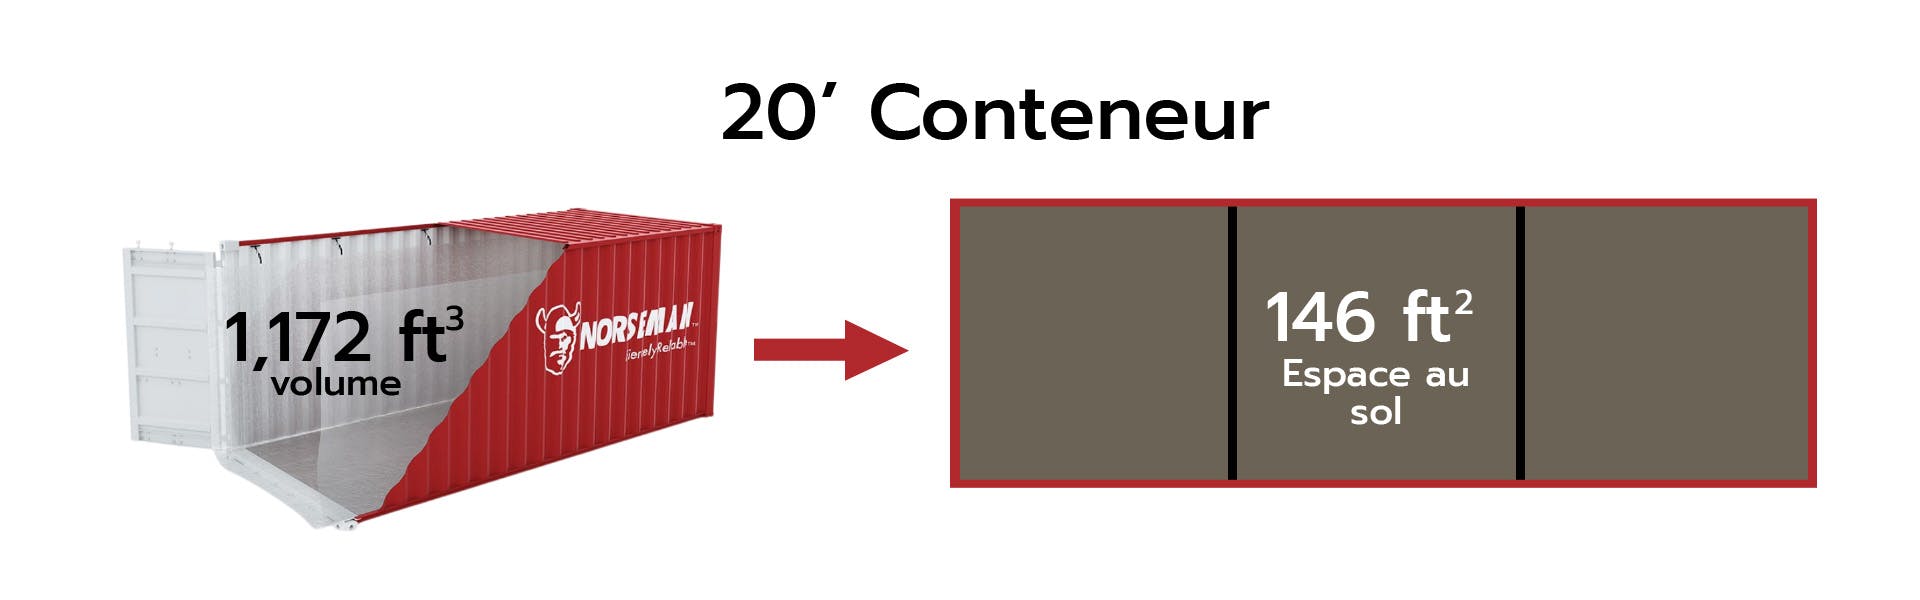 article image container space french language